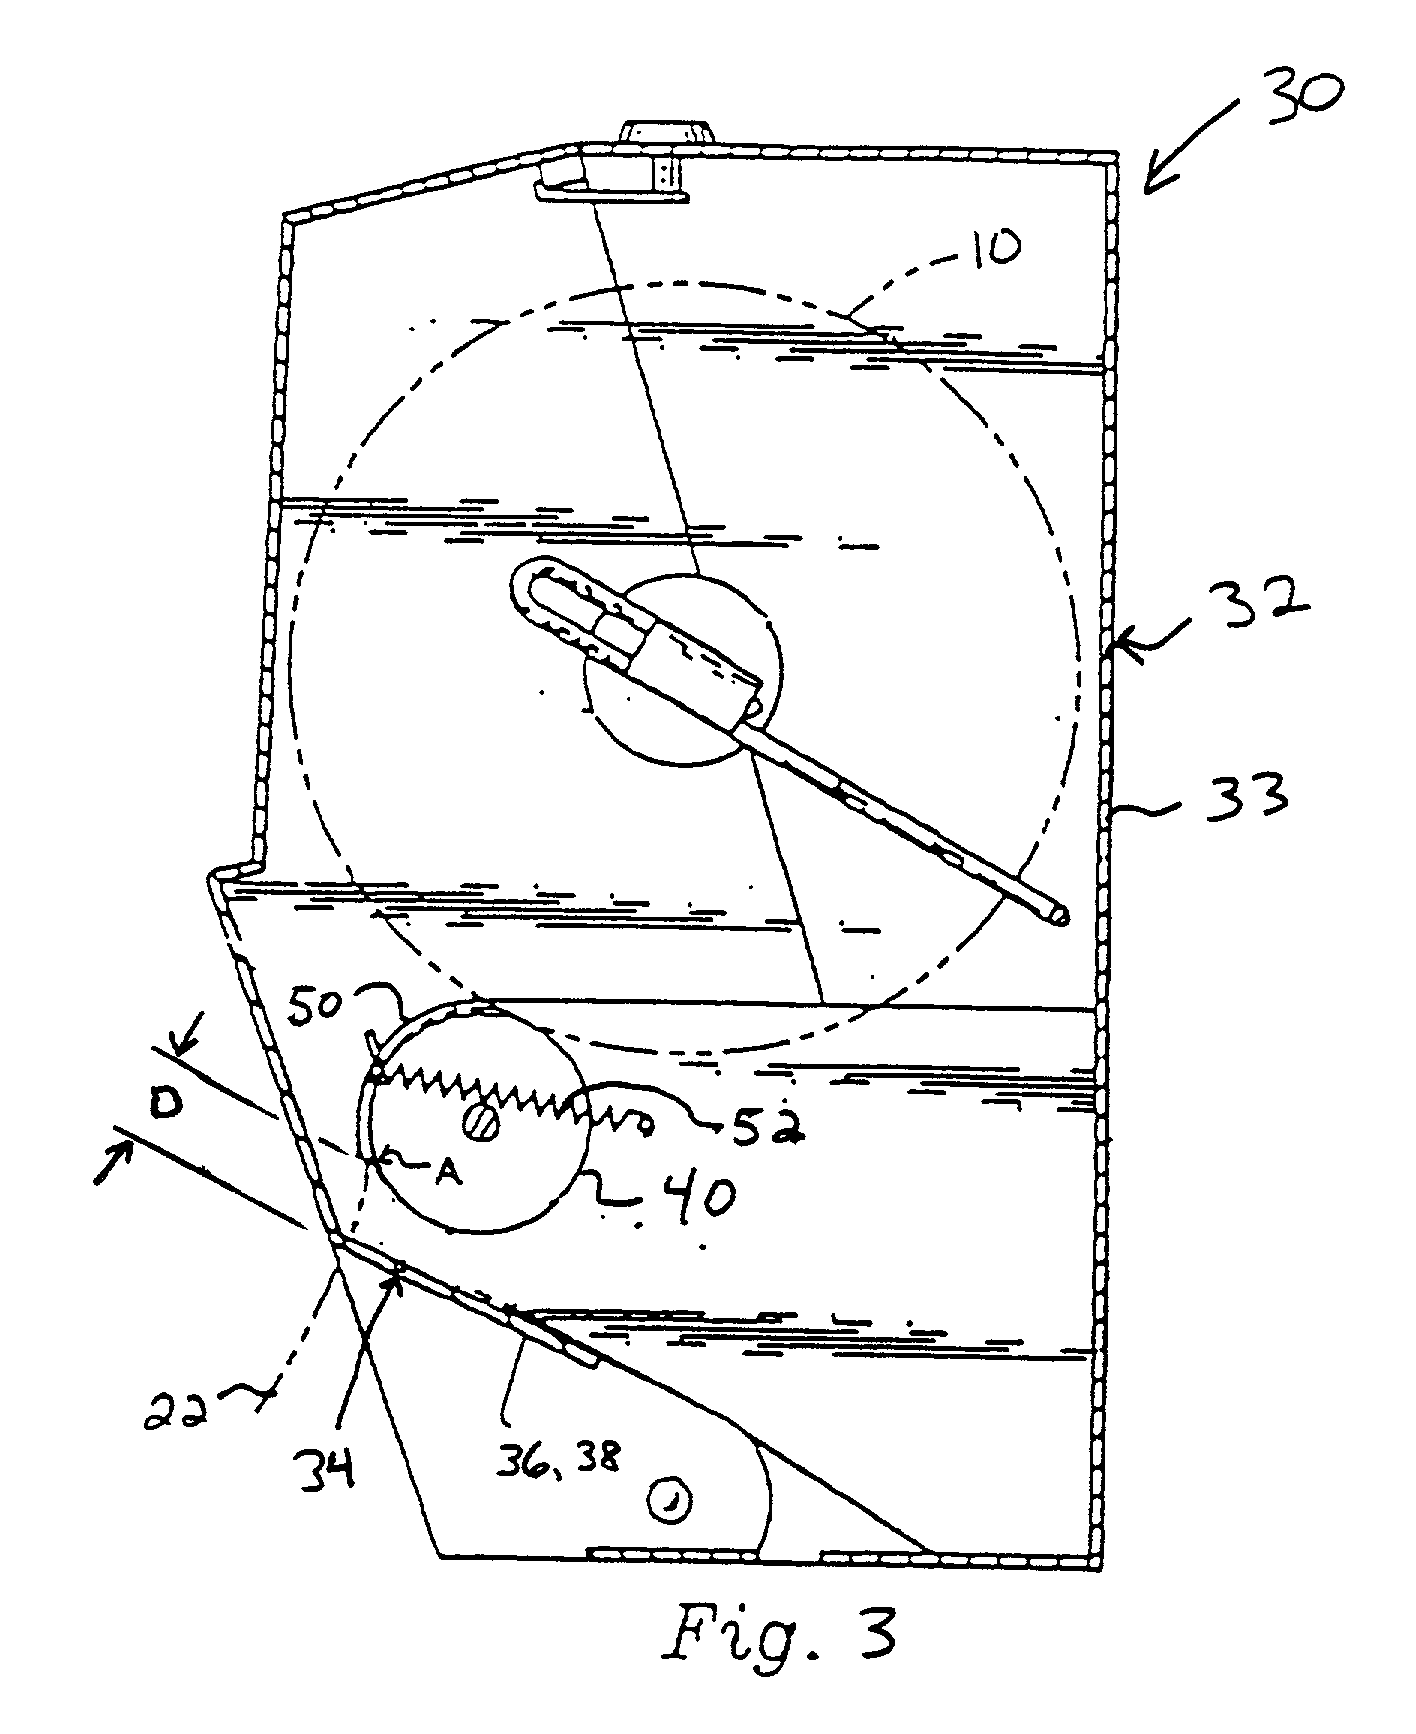 Sheet material having weakness zones and a system for dispensing the material